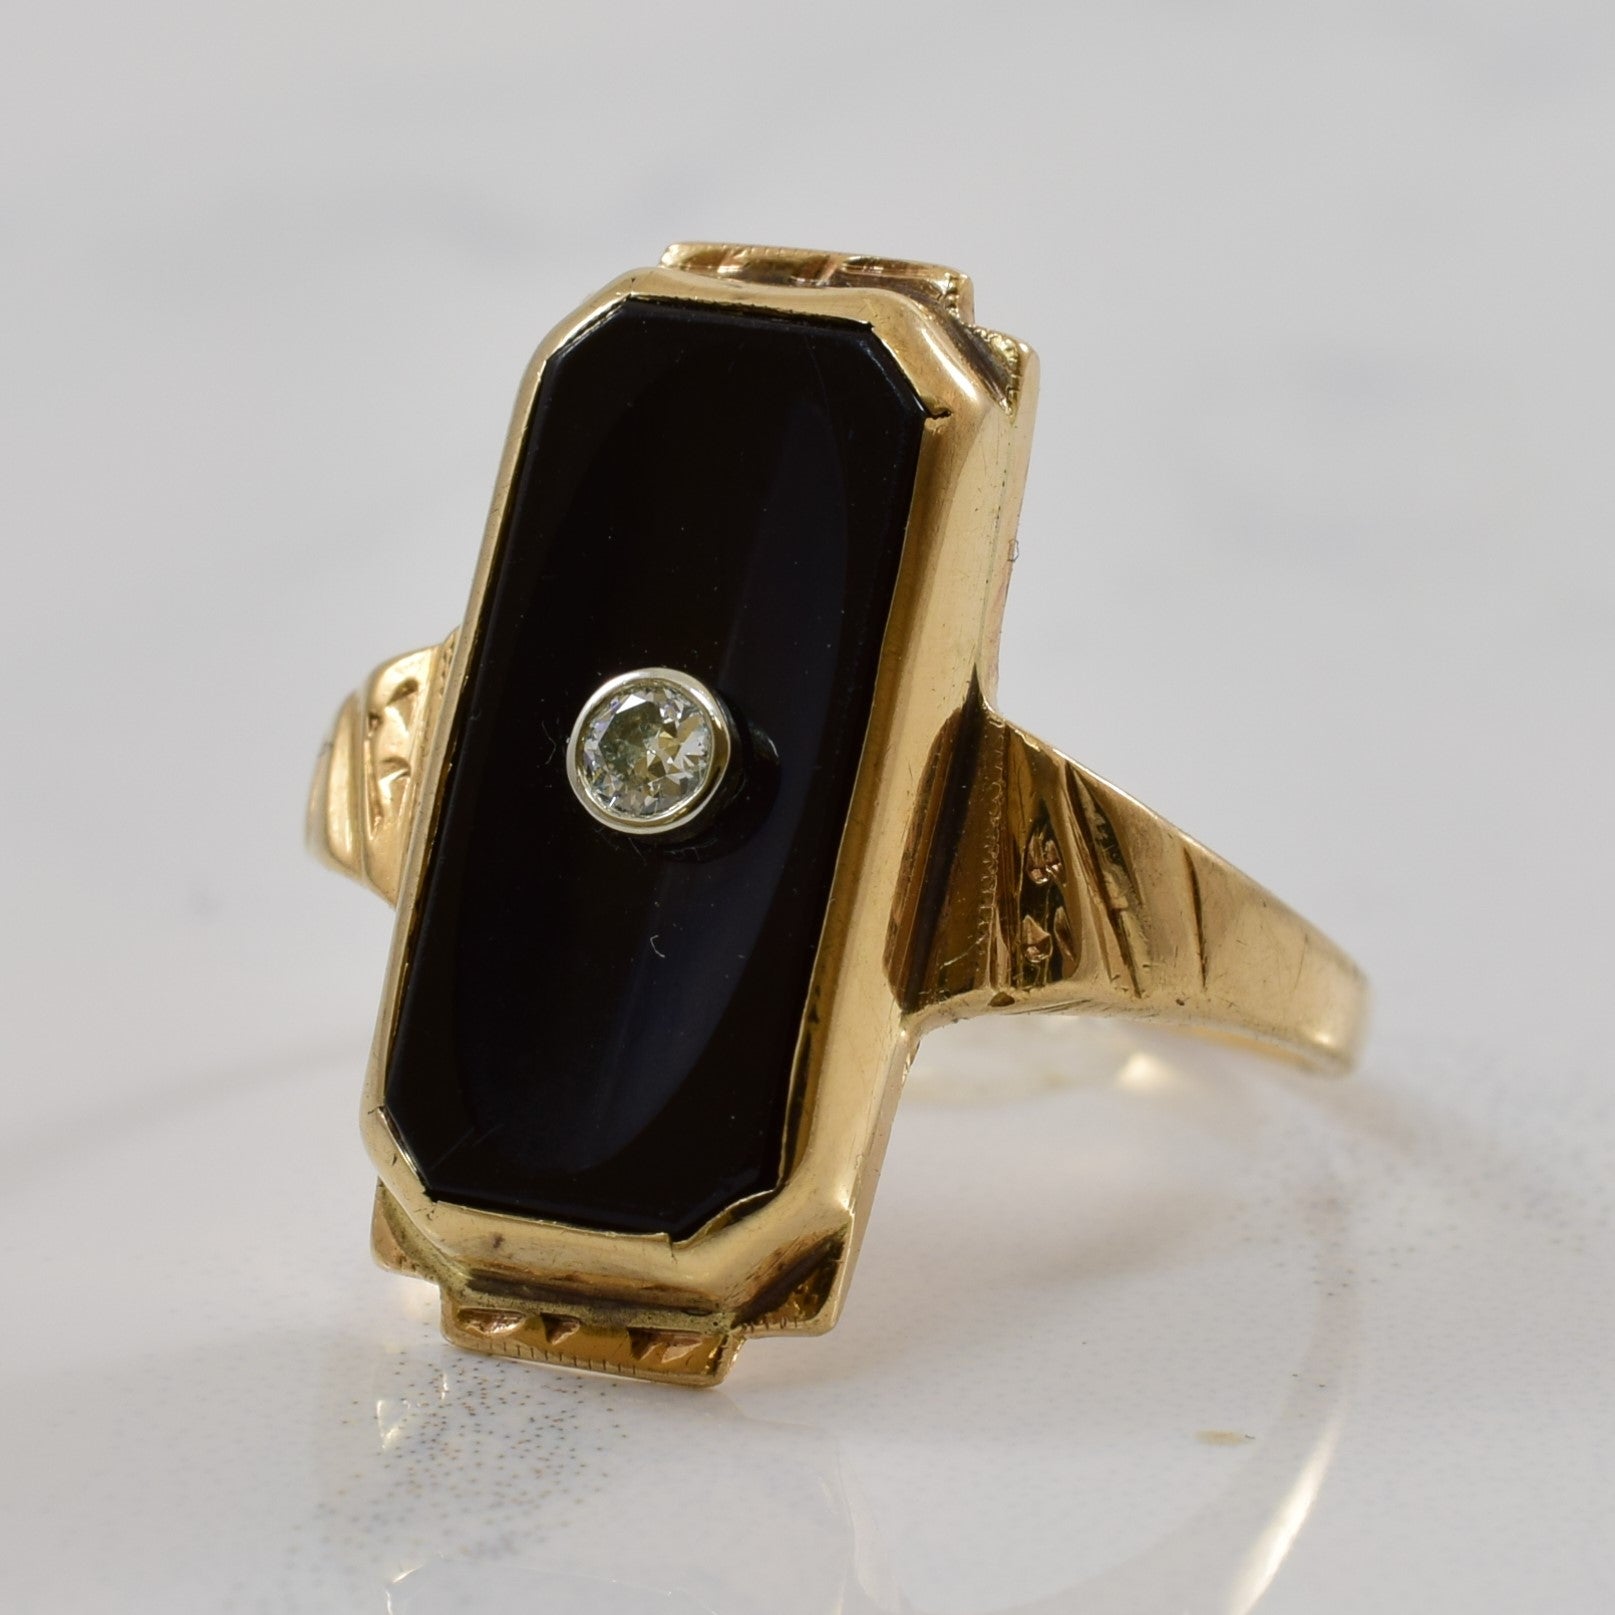 Early 1900s Onyx & Diamond Mourning Ring | 2.25ct, 0.03ct | SZ 4 |